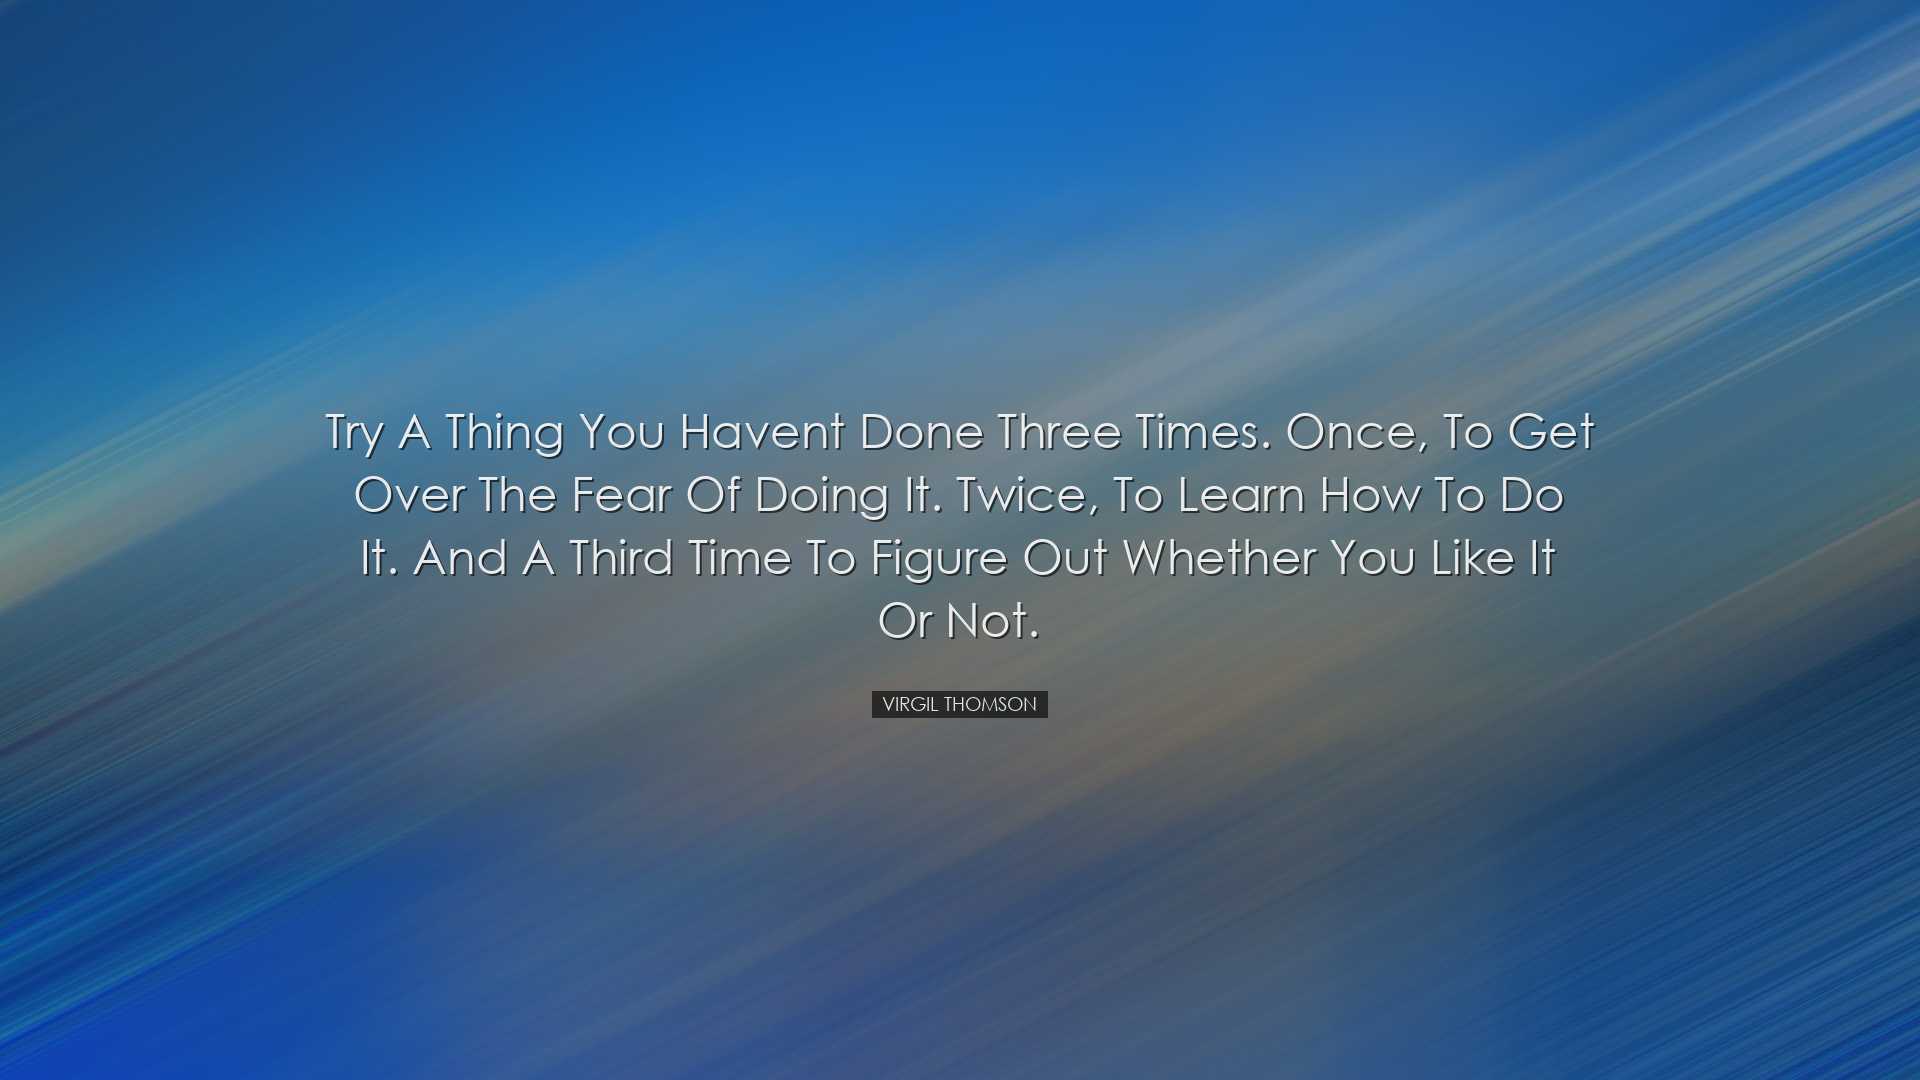 Try a thing you havent done three times. Once, to get over the fea